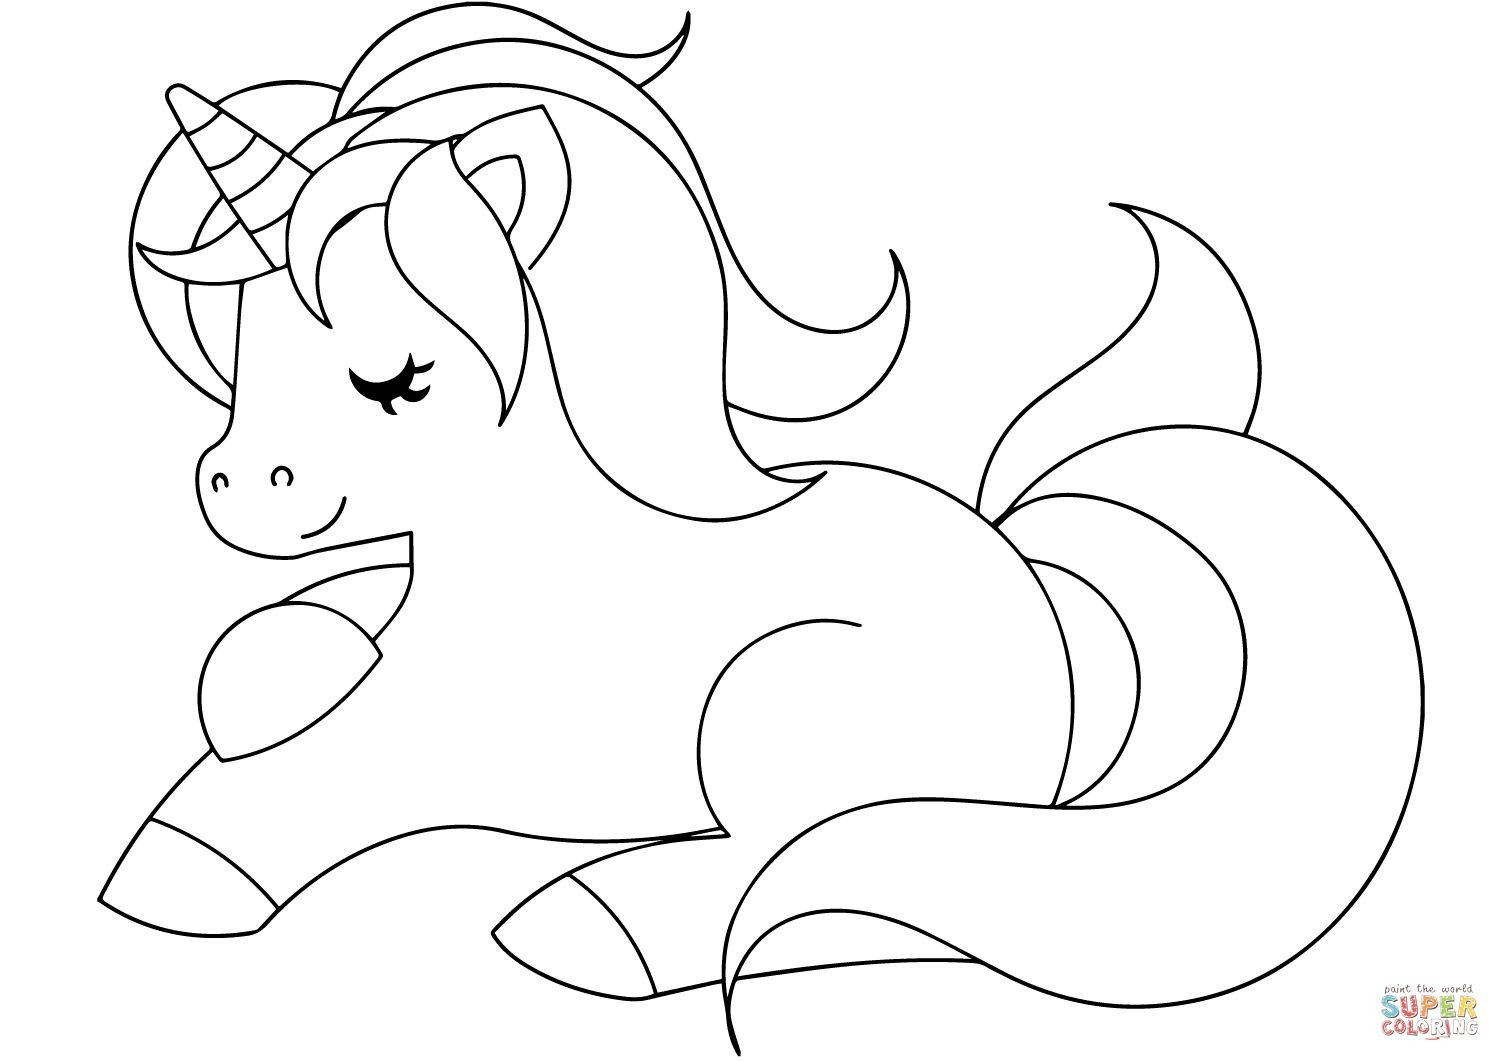 Coloring Pages For Girls Unicorns
 Cute Unicorn Coloring Page